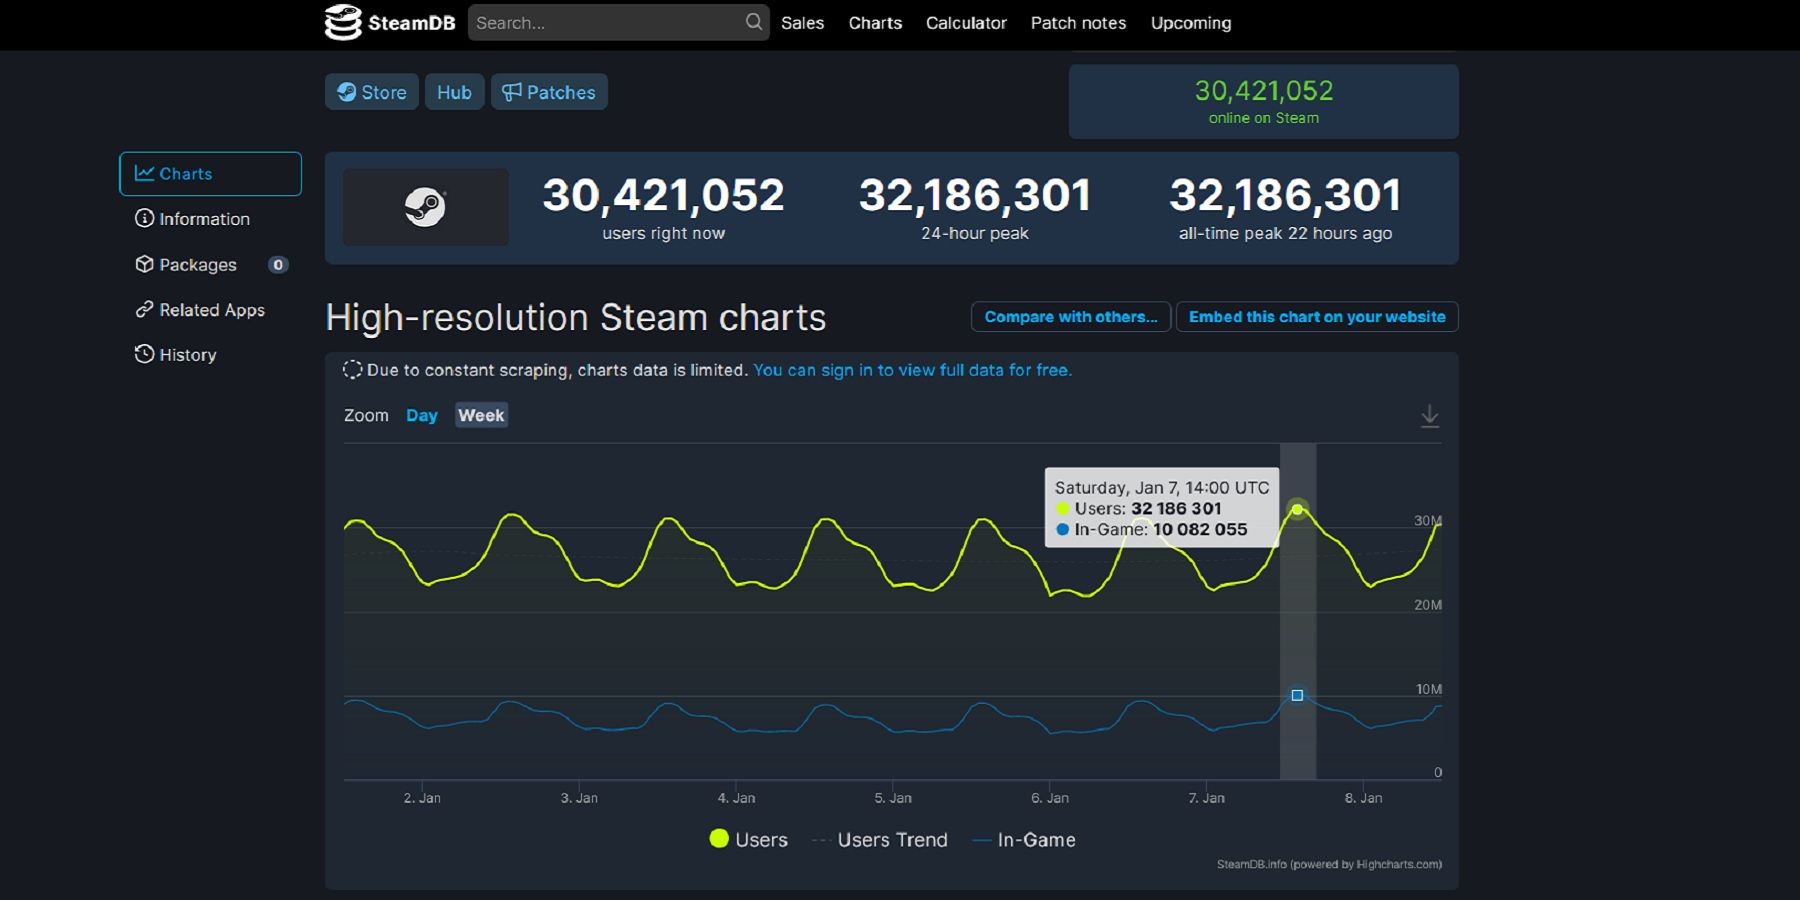 Screenshot from the SteabDB website showing the number of concurrent players on Steam.